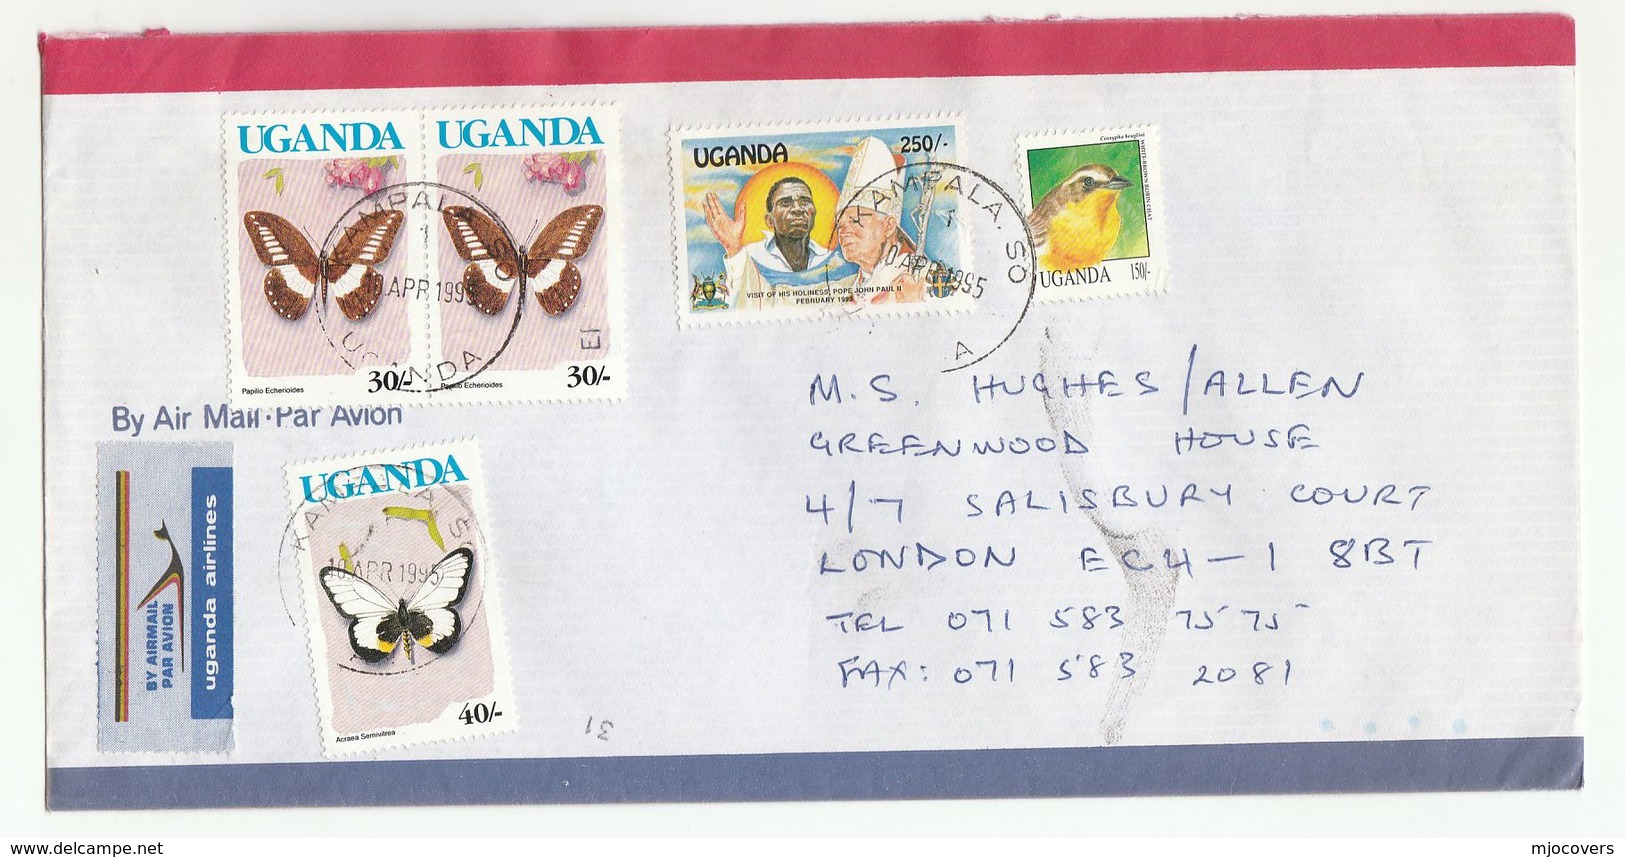 1995 UGANDA COVER  BUTTERFLY POPE JPII  BIRD Stamps  UGANDA AIRLINES AIRMAIL LABEL Butterflies Insect Aviation Religion - Uganda (1962-...)